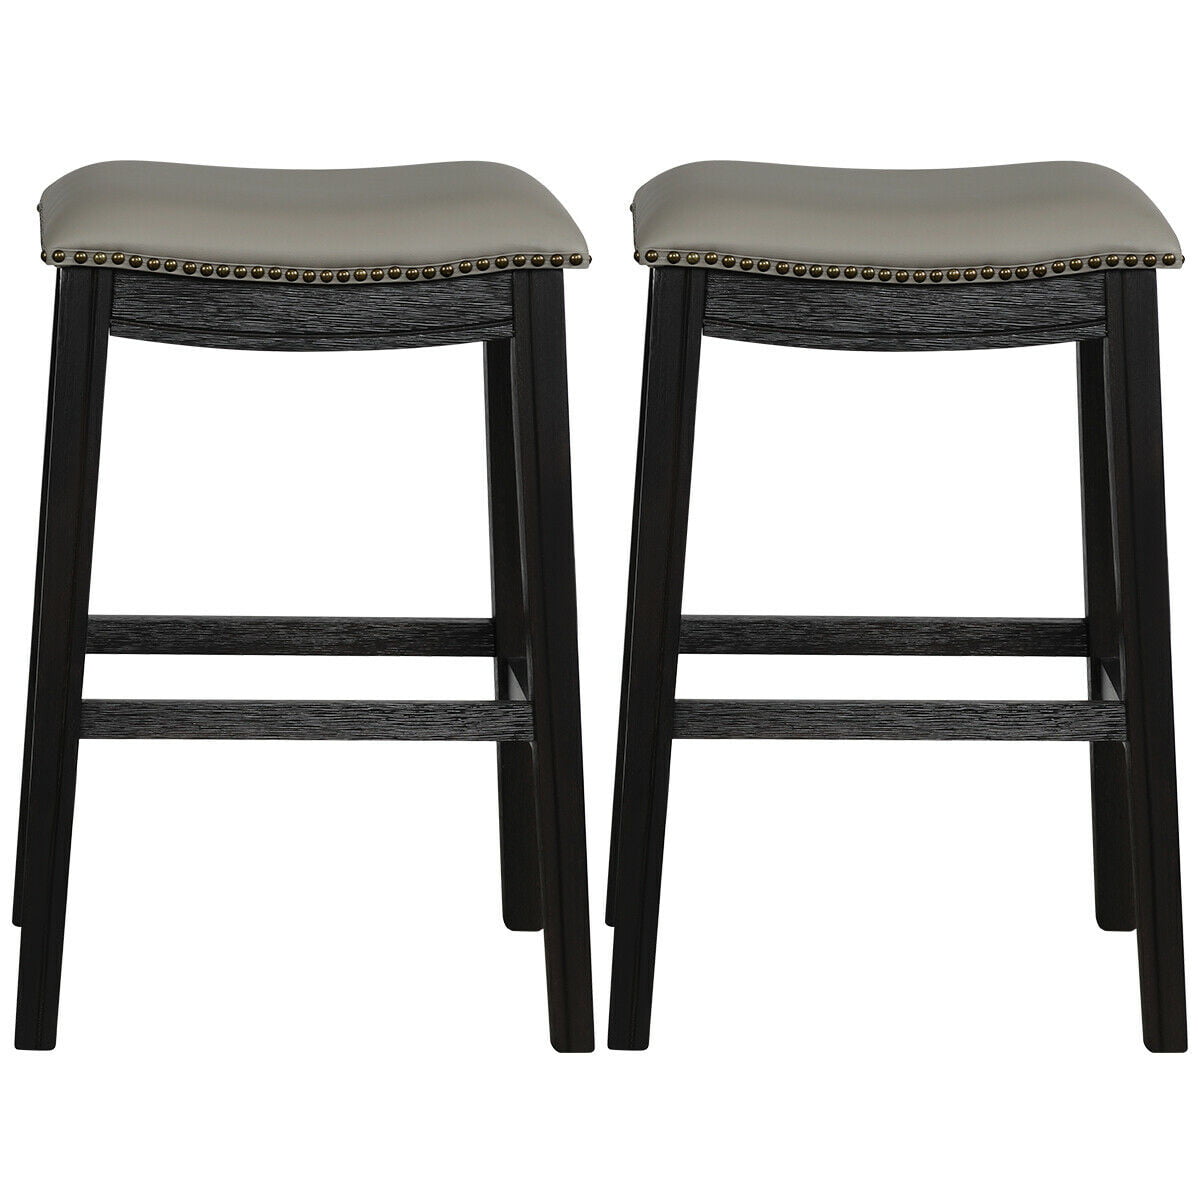 Top Black Set Of 2 Kitchen Counter, White Leather Bar Stools With Nailheads